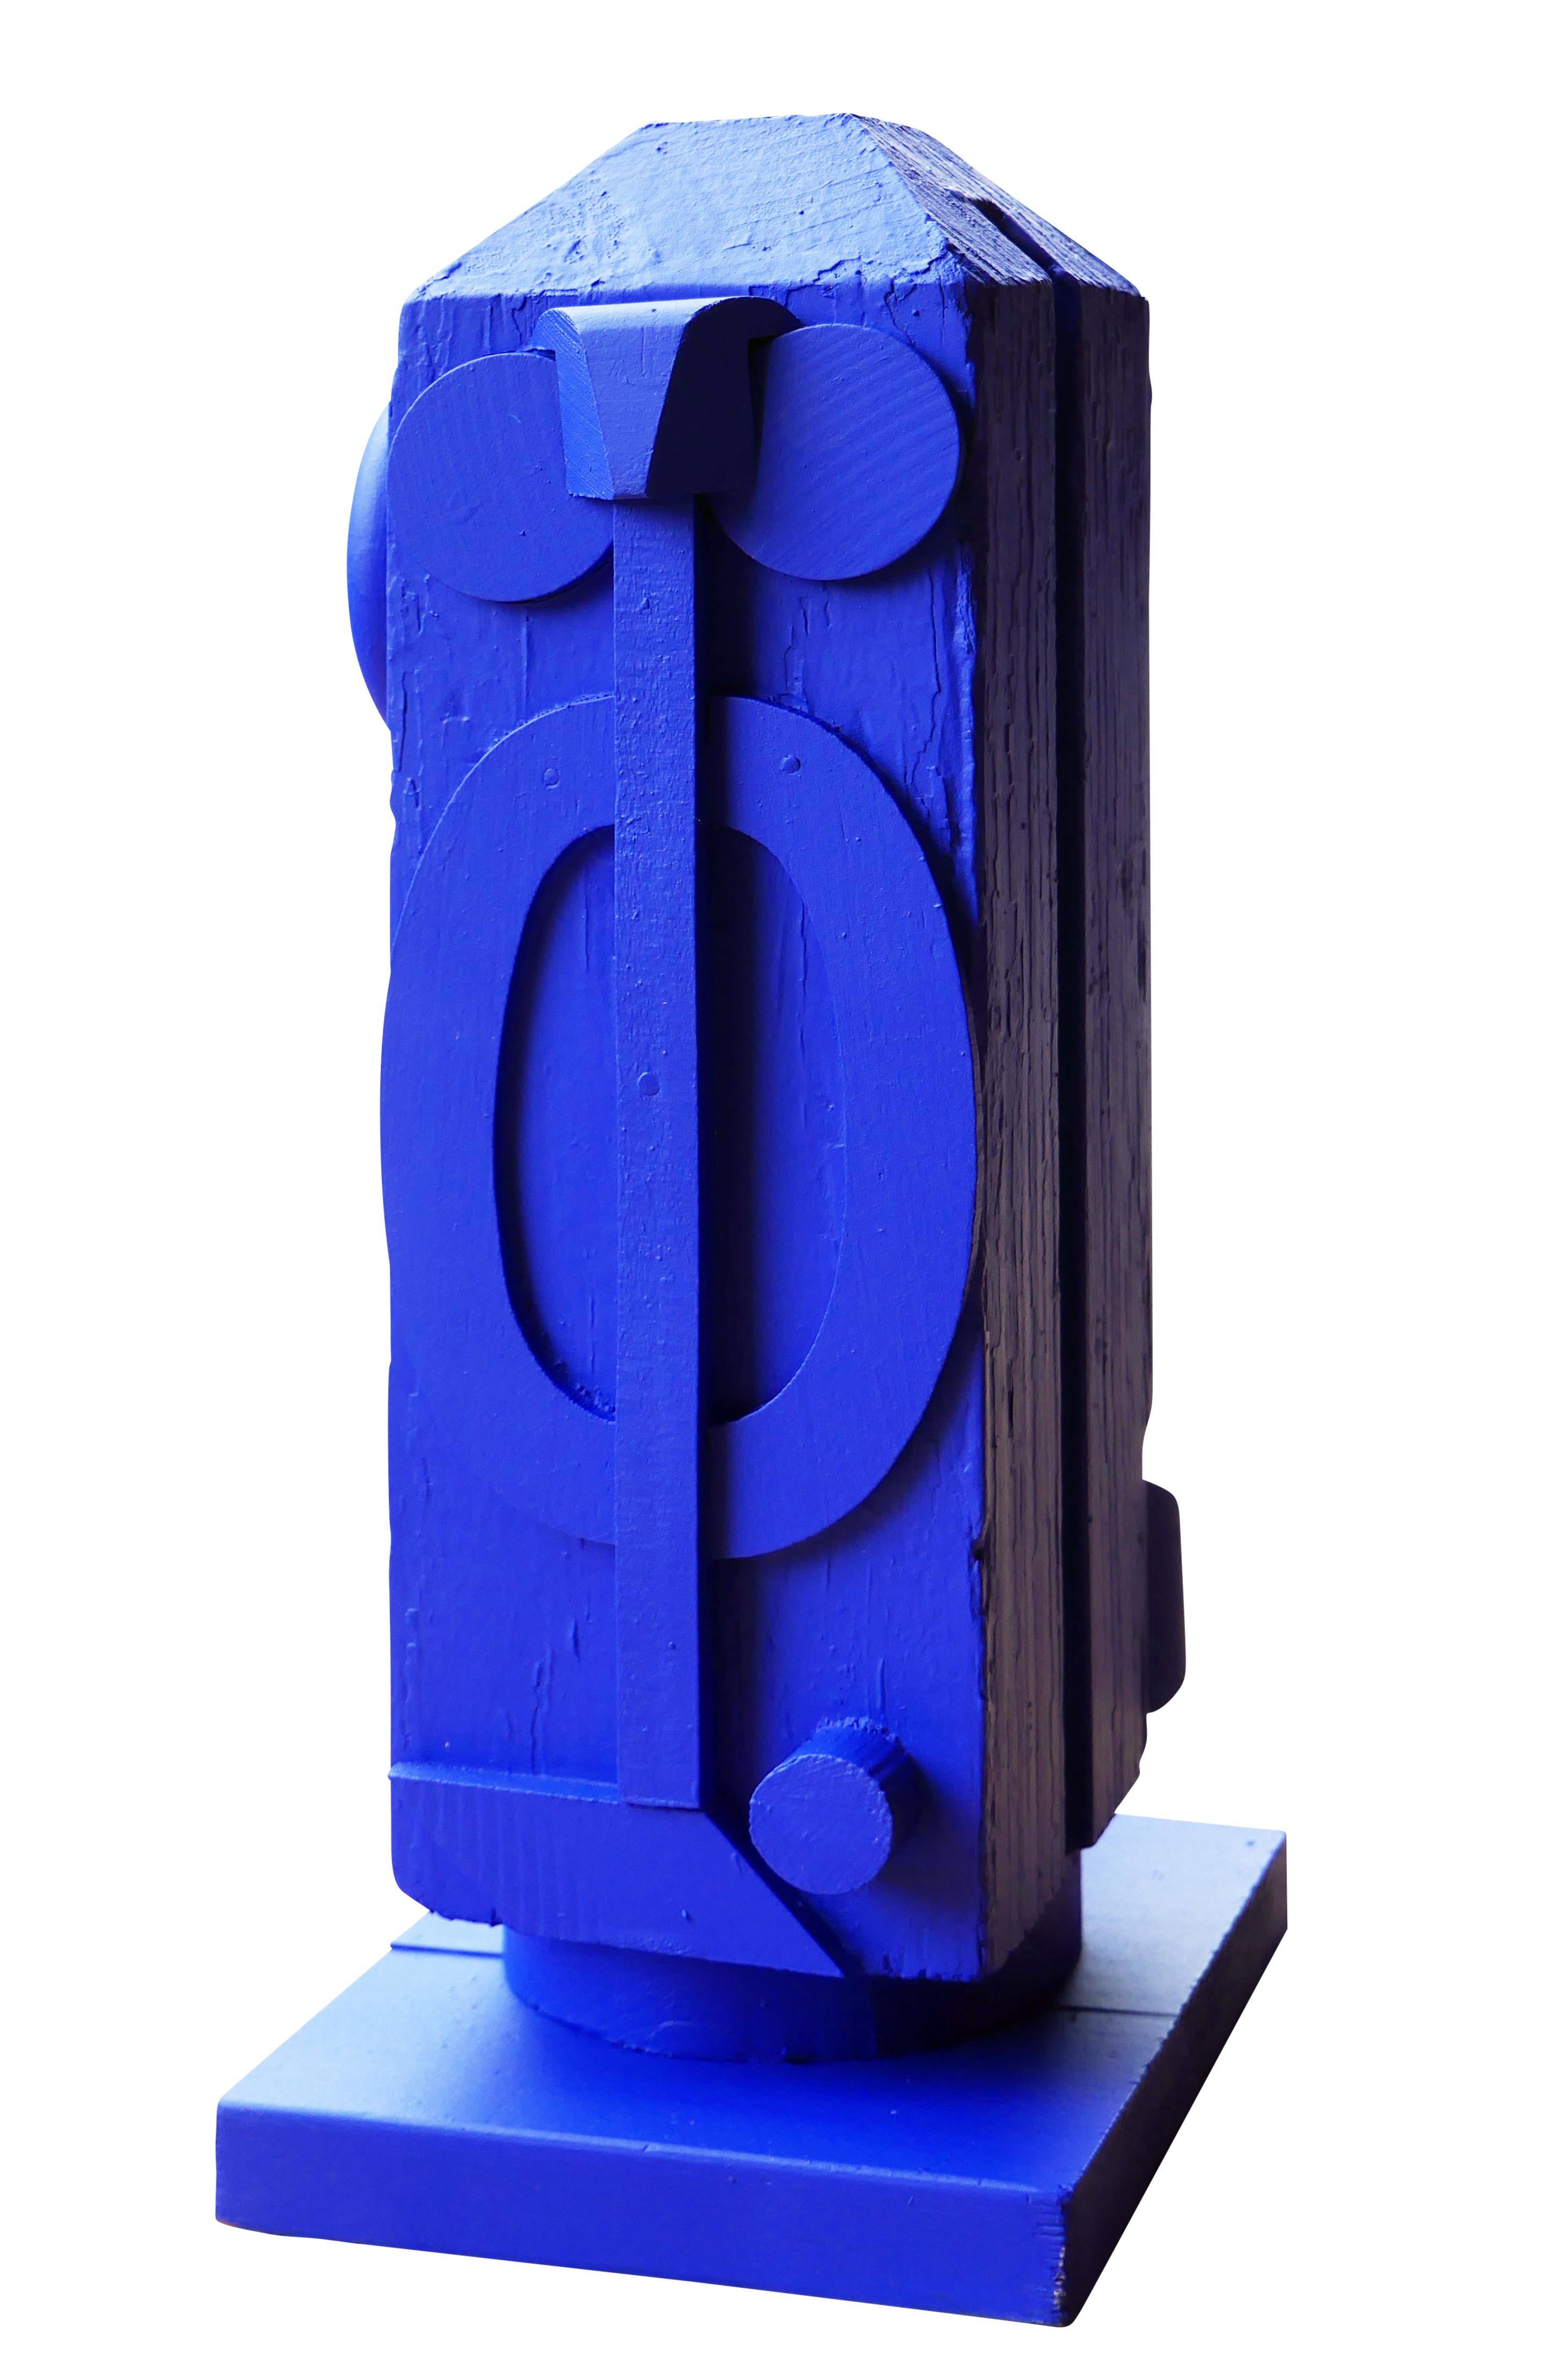 Bright Blue Geometric Abstract Freestanding Contemporary Sculpture For Sale 1